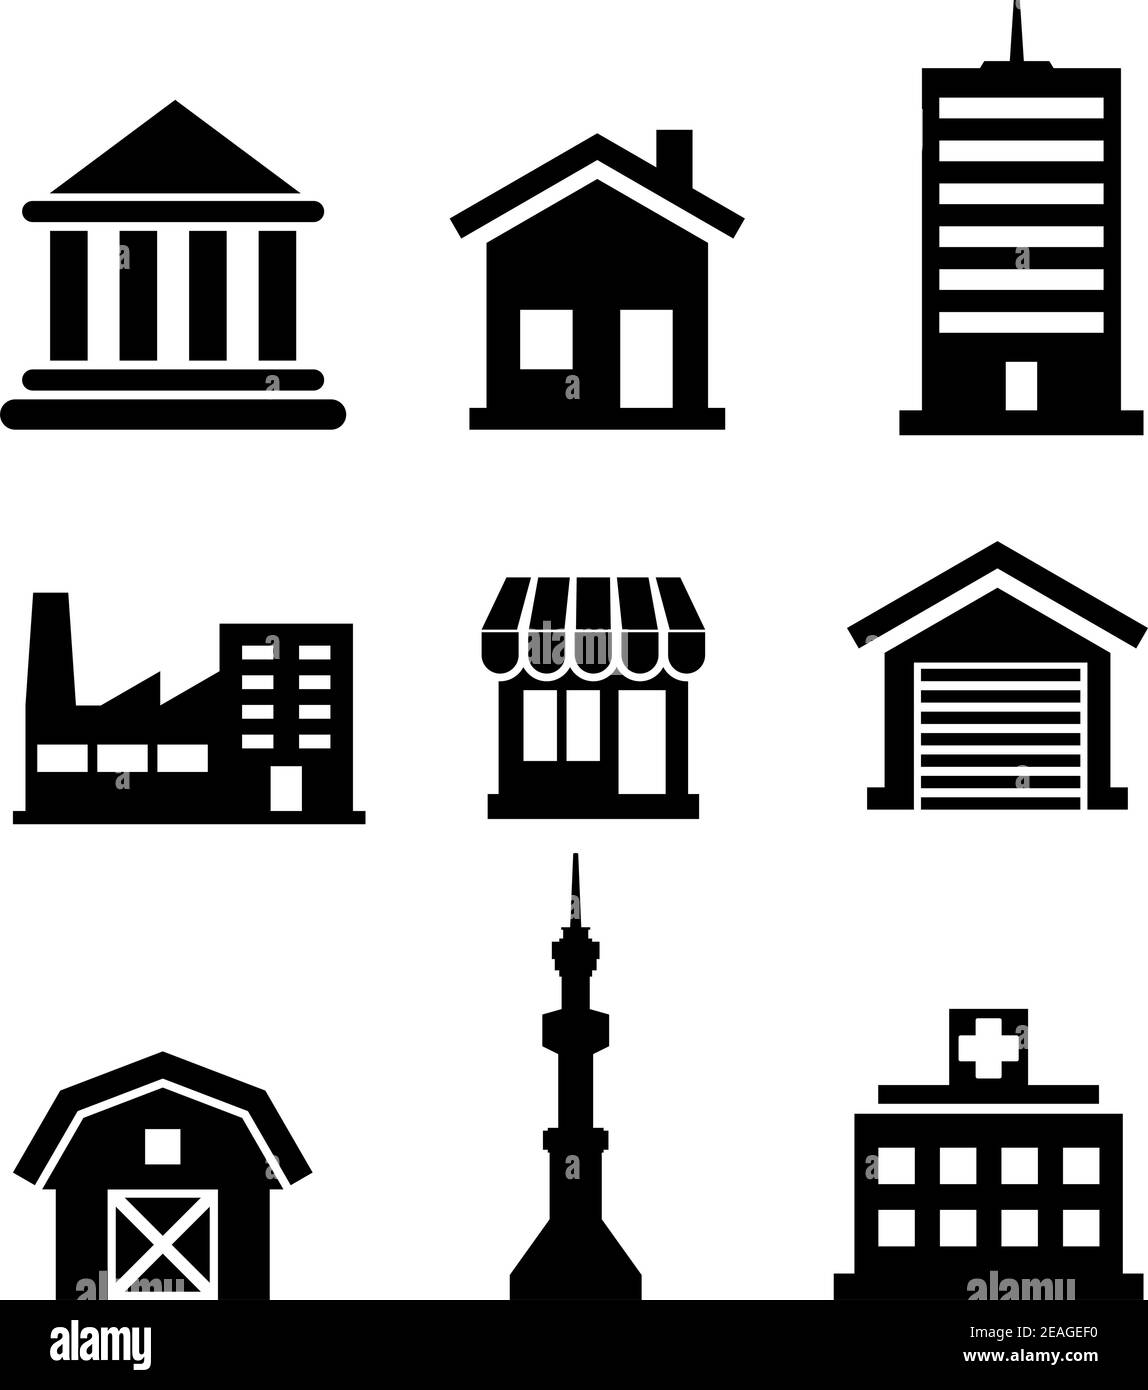 Silhouetted buildings and architectural icons depicting church, temple, hospital, tower, shop, market, office, factory, house and farm Stock Vector